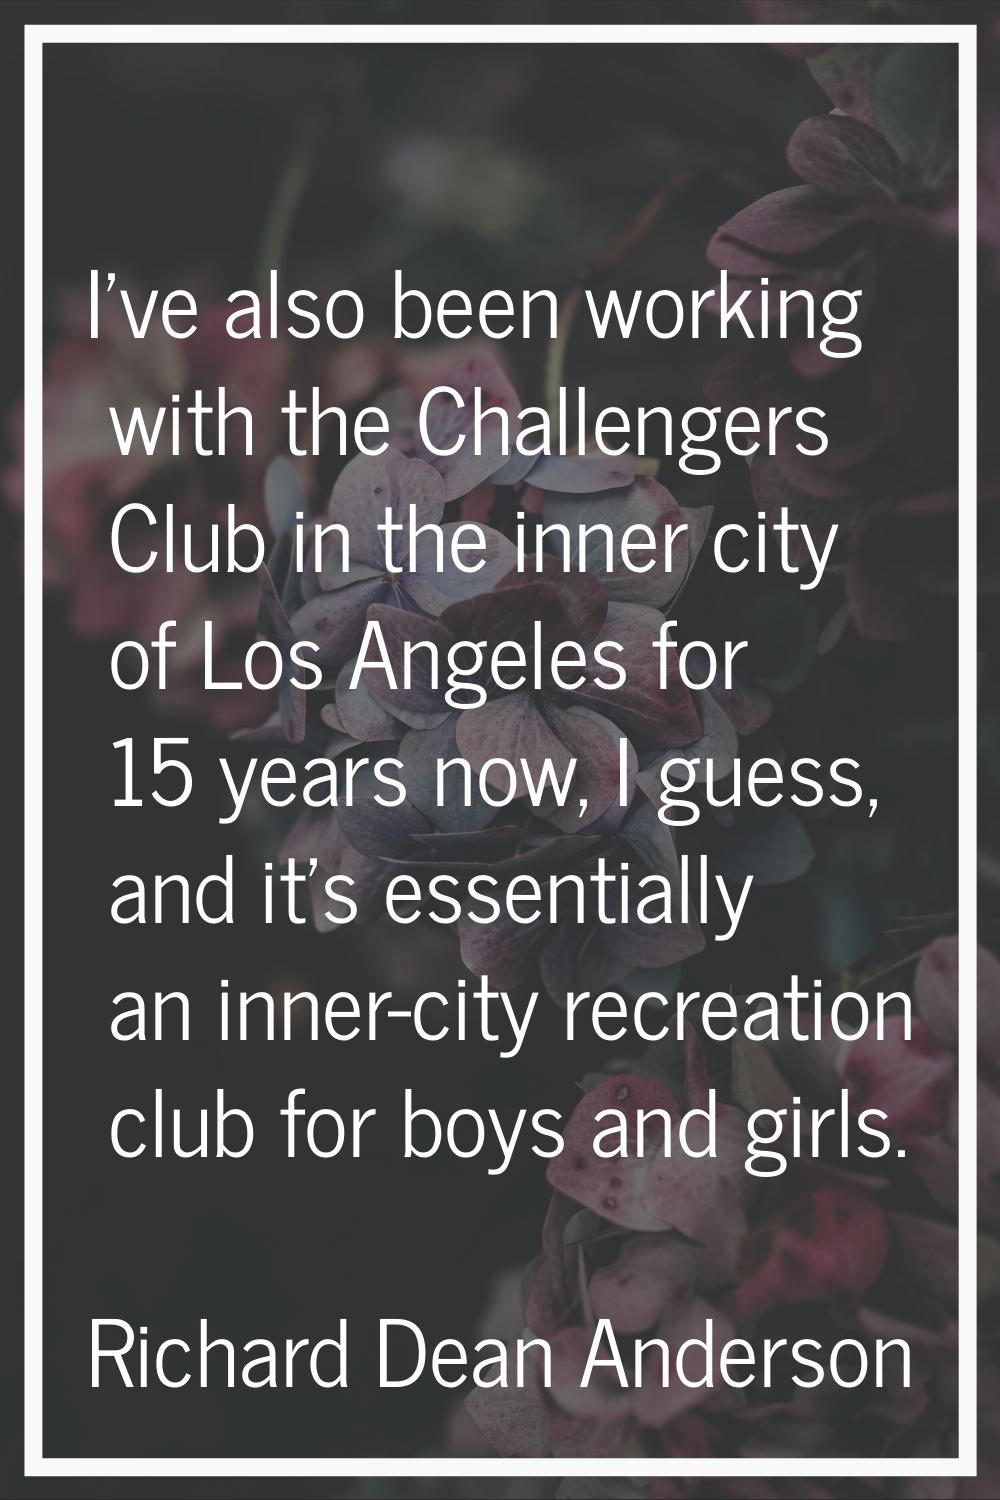 I've also been working with the Challengers Club in the inner city of Los Angeles for 15 years now,